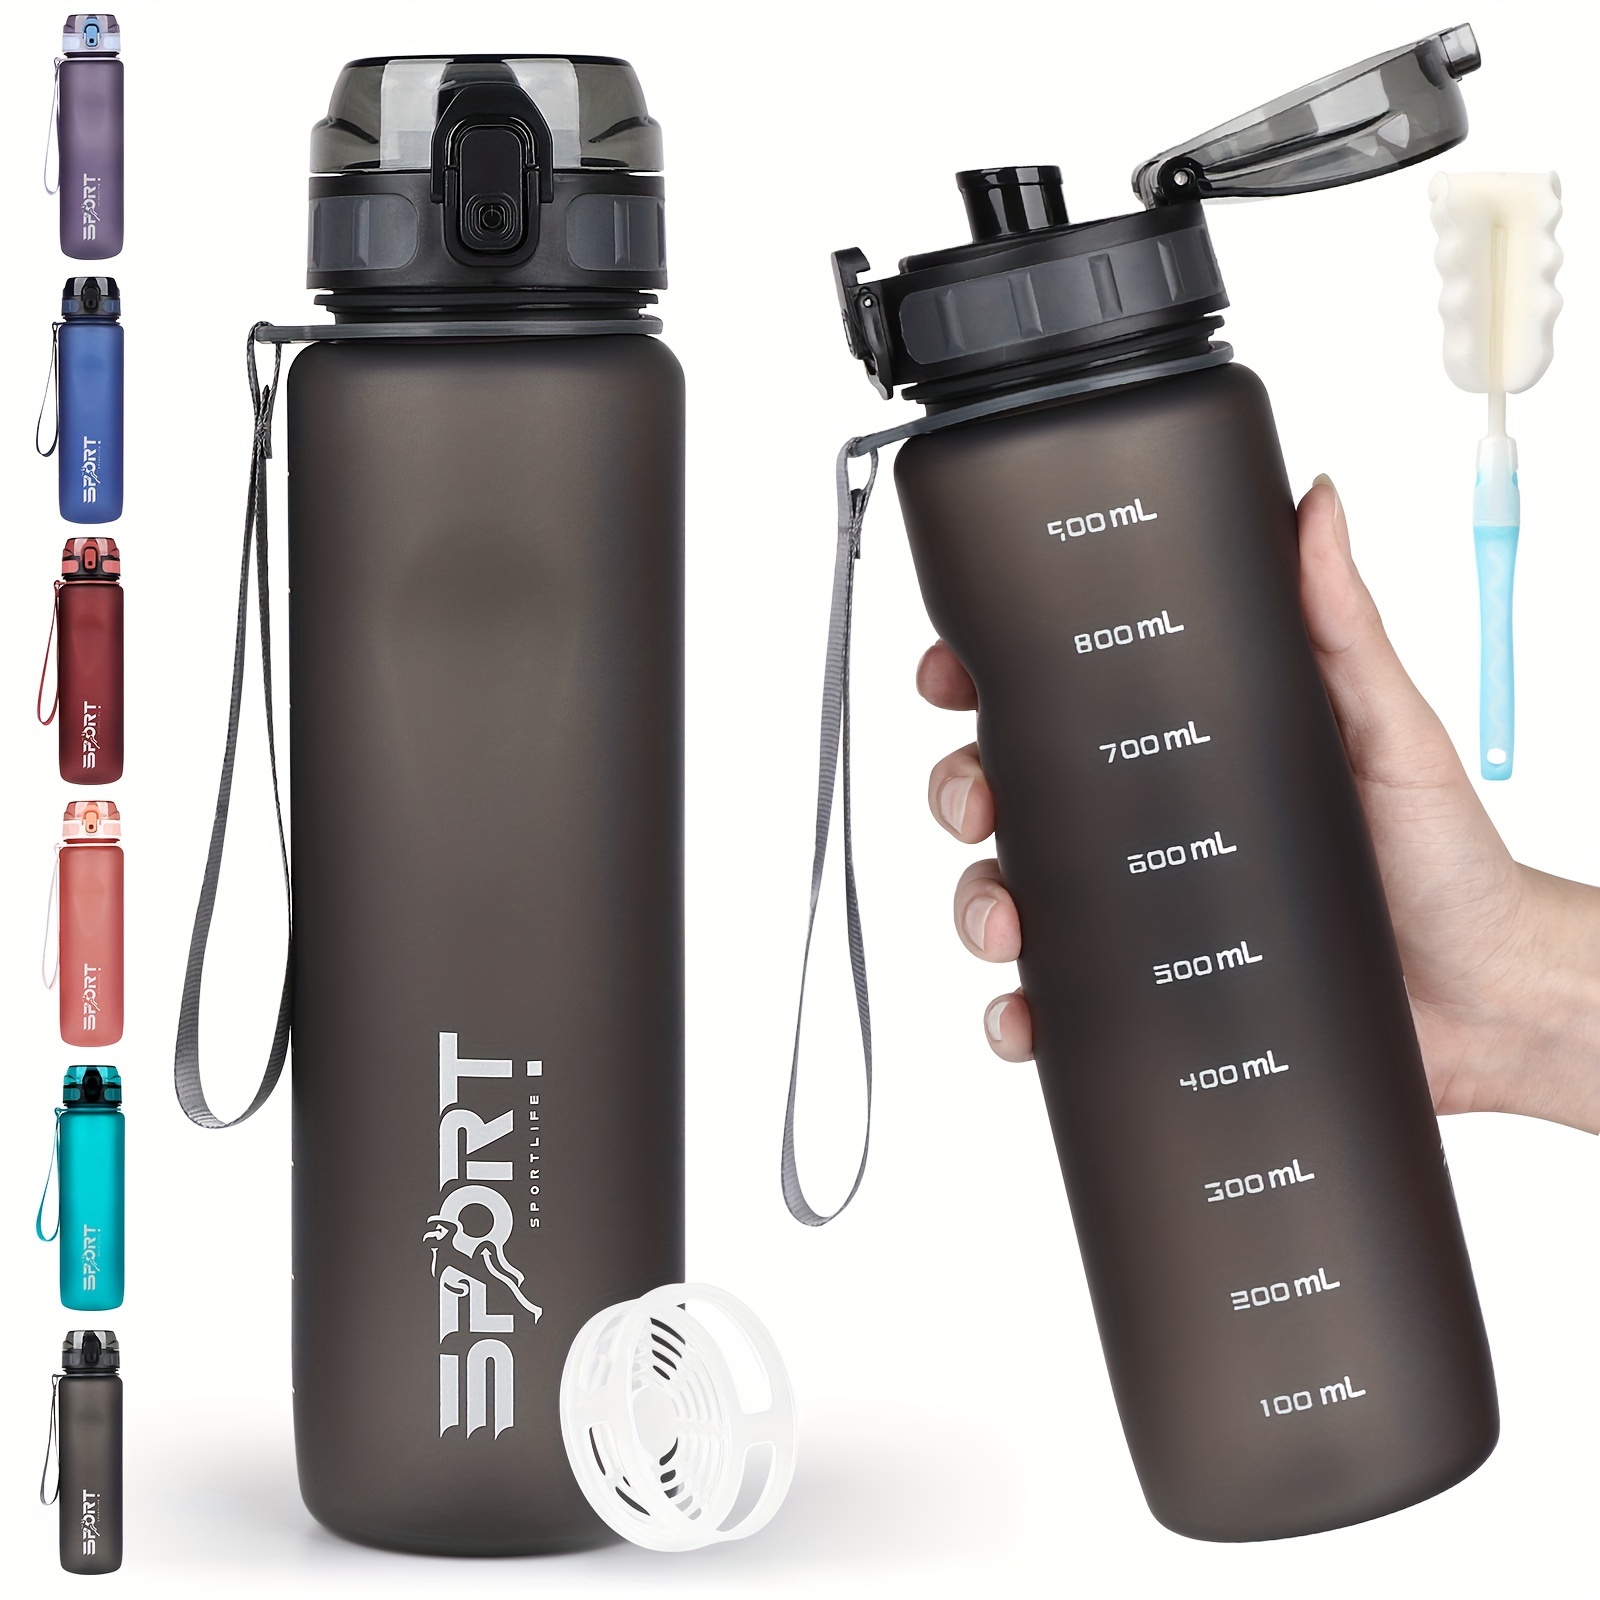 

Hasagei Water Bottle 1l Sports Water Bottle Leak-proof Drinking Bottle With Scale For Bicycle, Outdoor, School, Gym